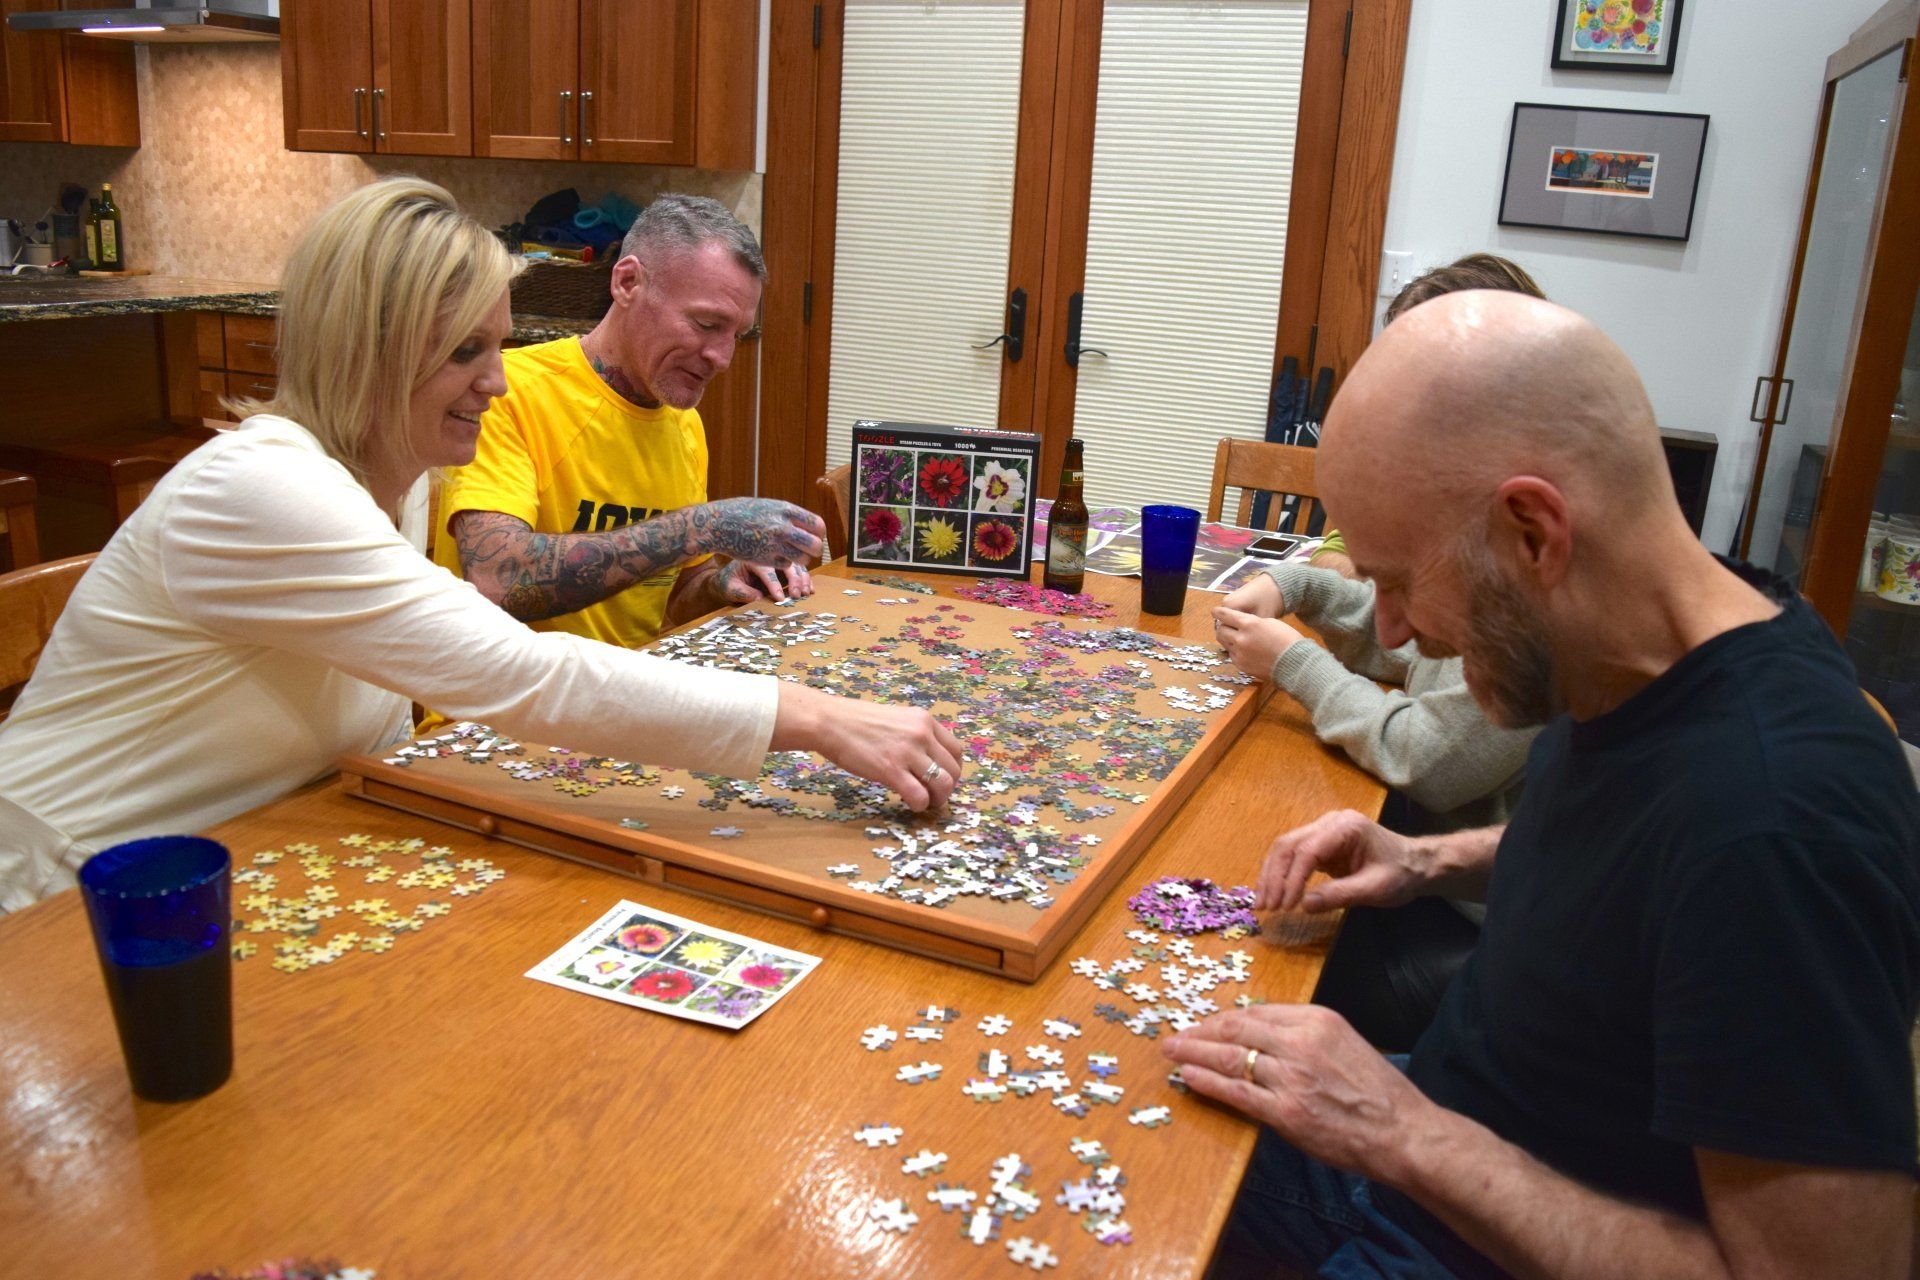 family putting a puzzle together